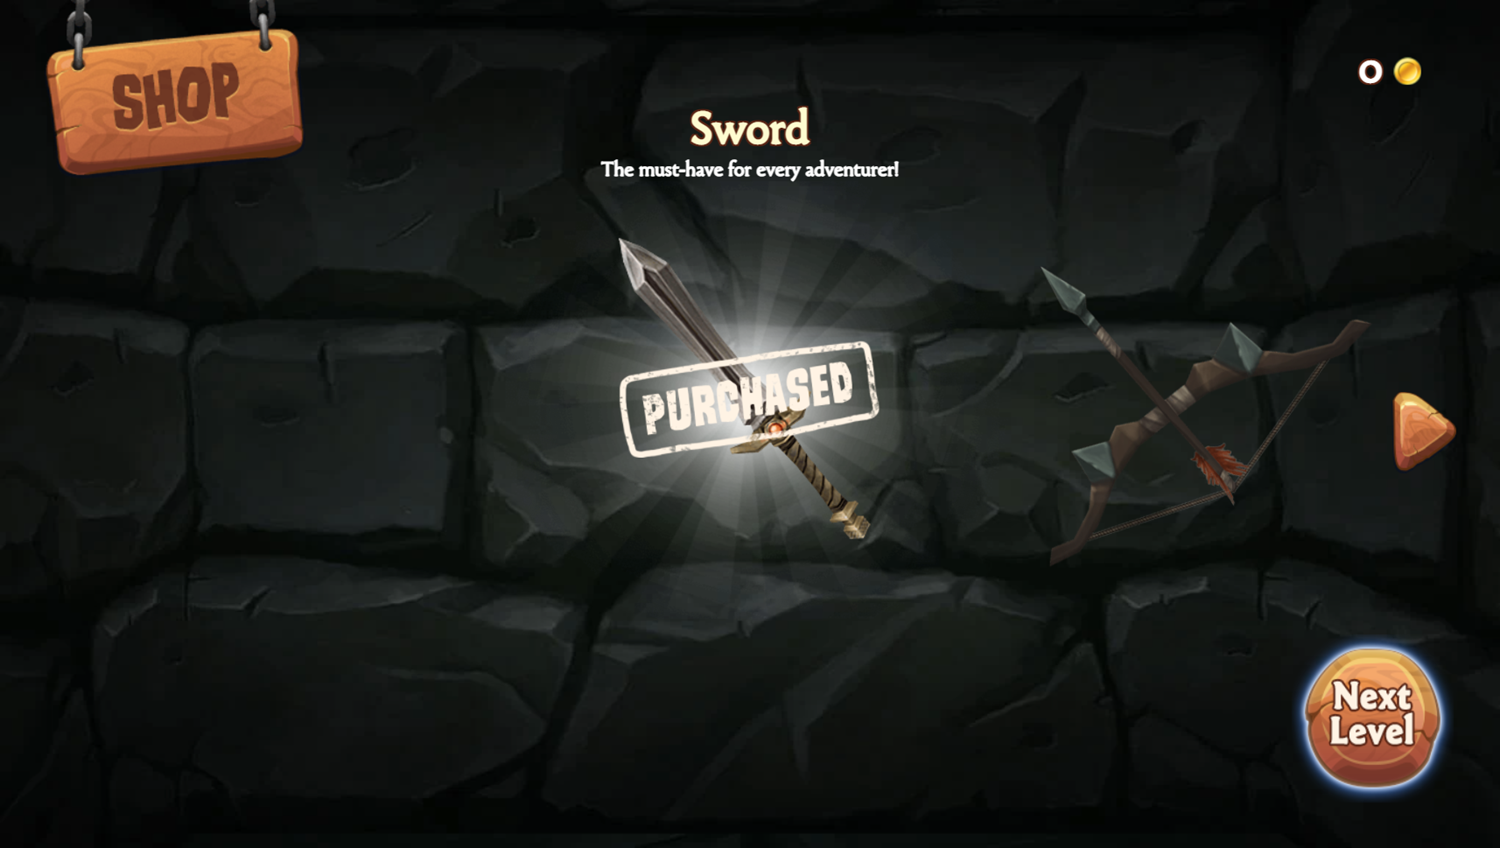 Keep Out Game Purchase Sword Screenshot.